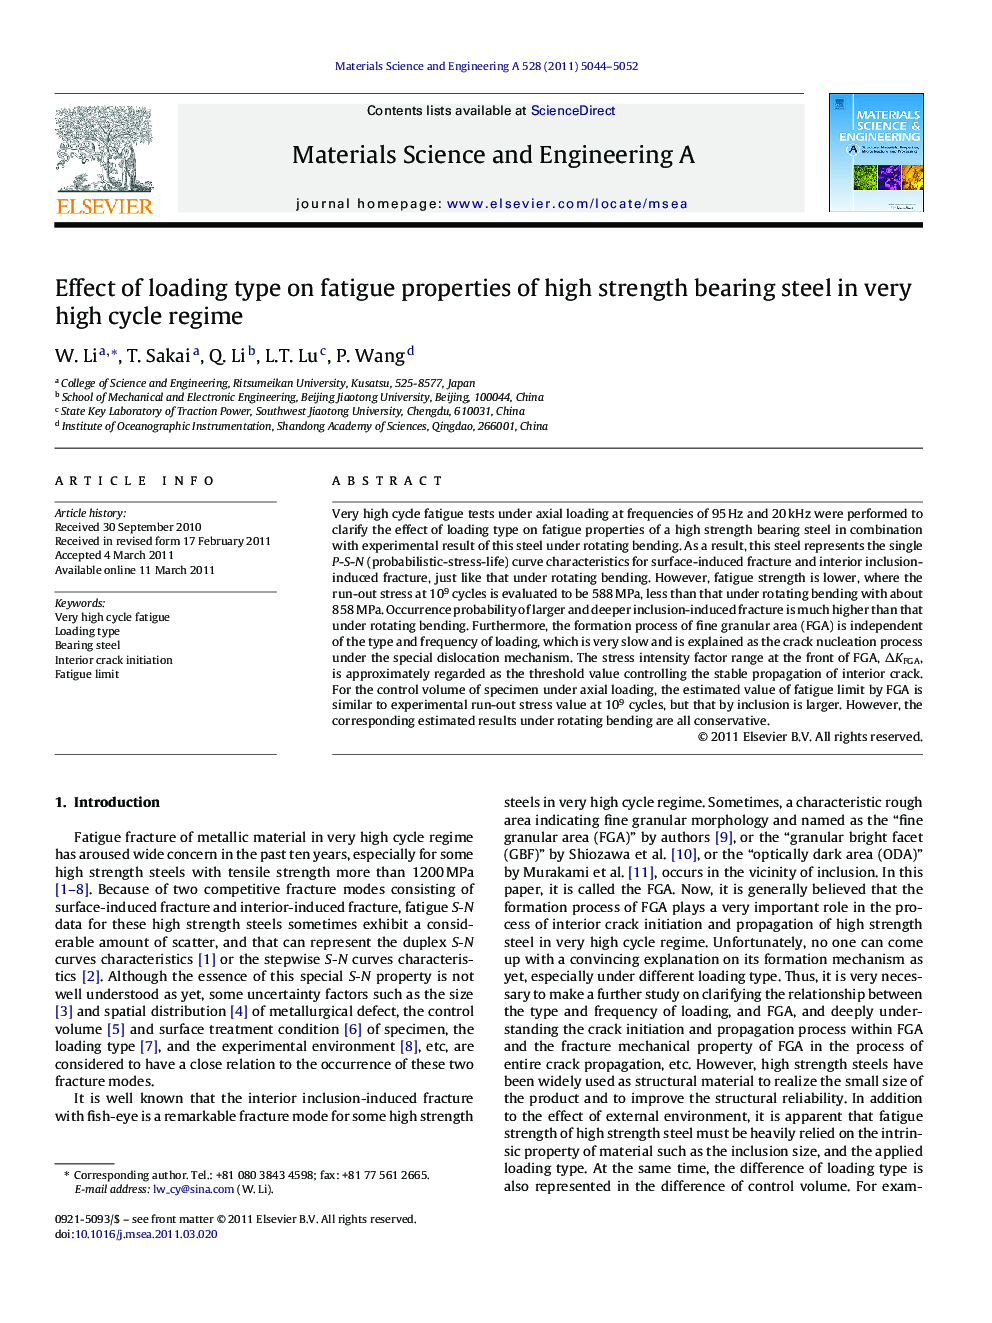 Effect of loading type on fatigue properties of high strength bearing steel in very high cycle regime